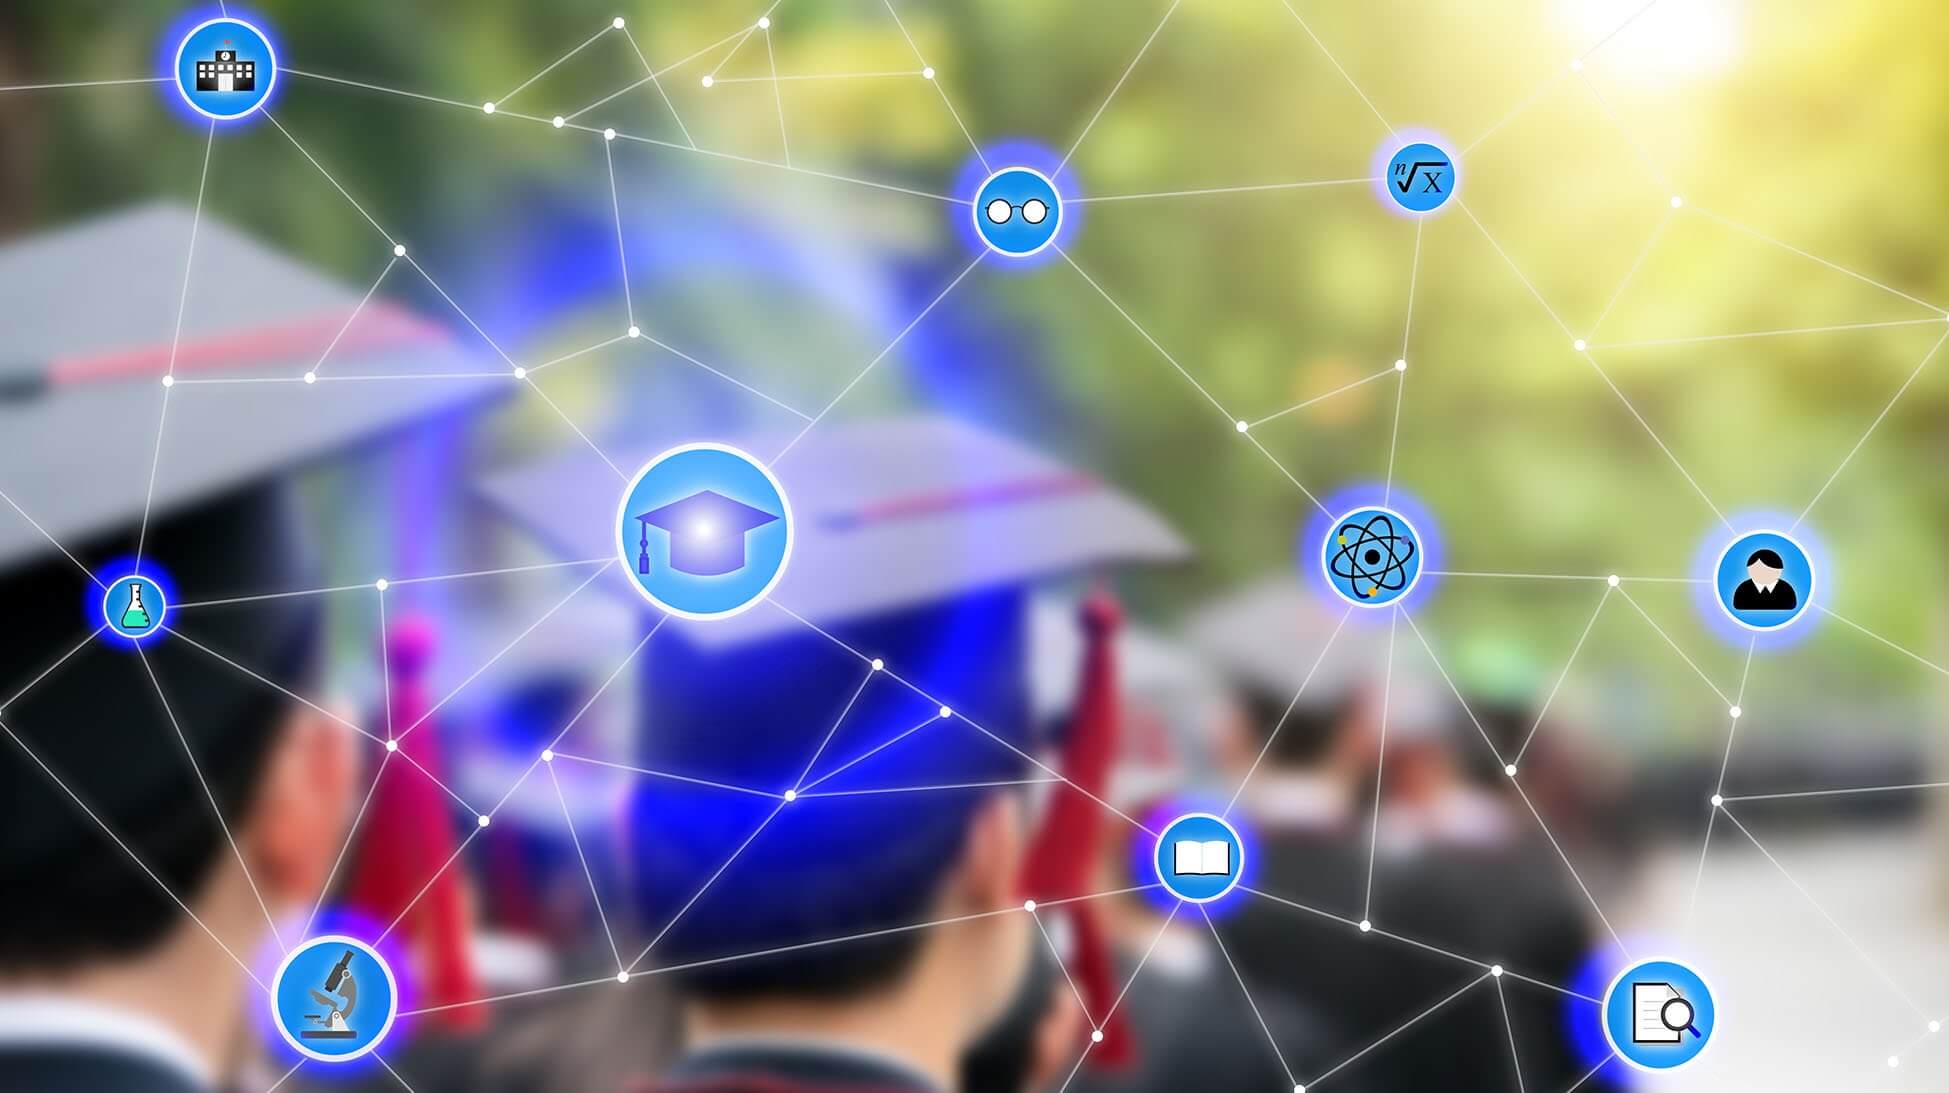 Singapore univeristy partners with Chinese tech company to bring Blockchain solutions